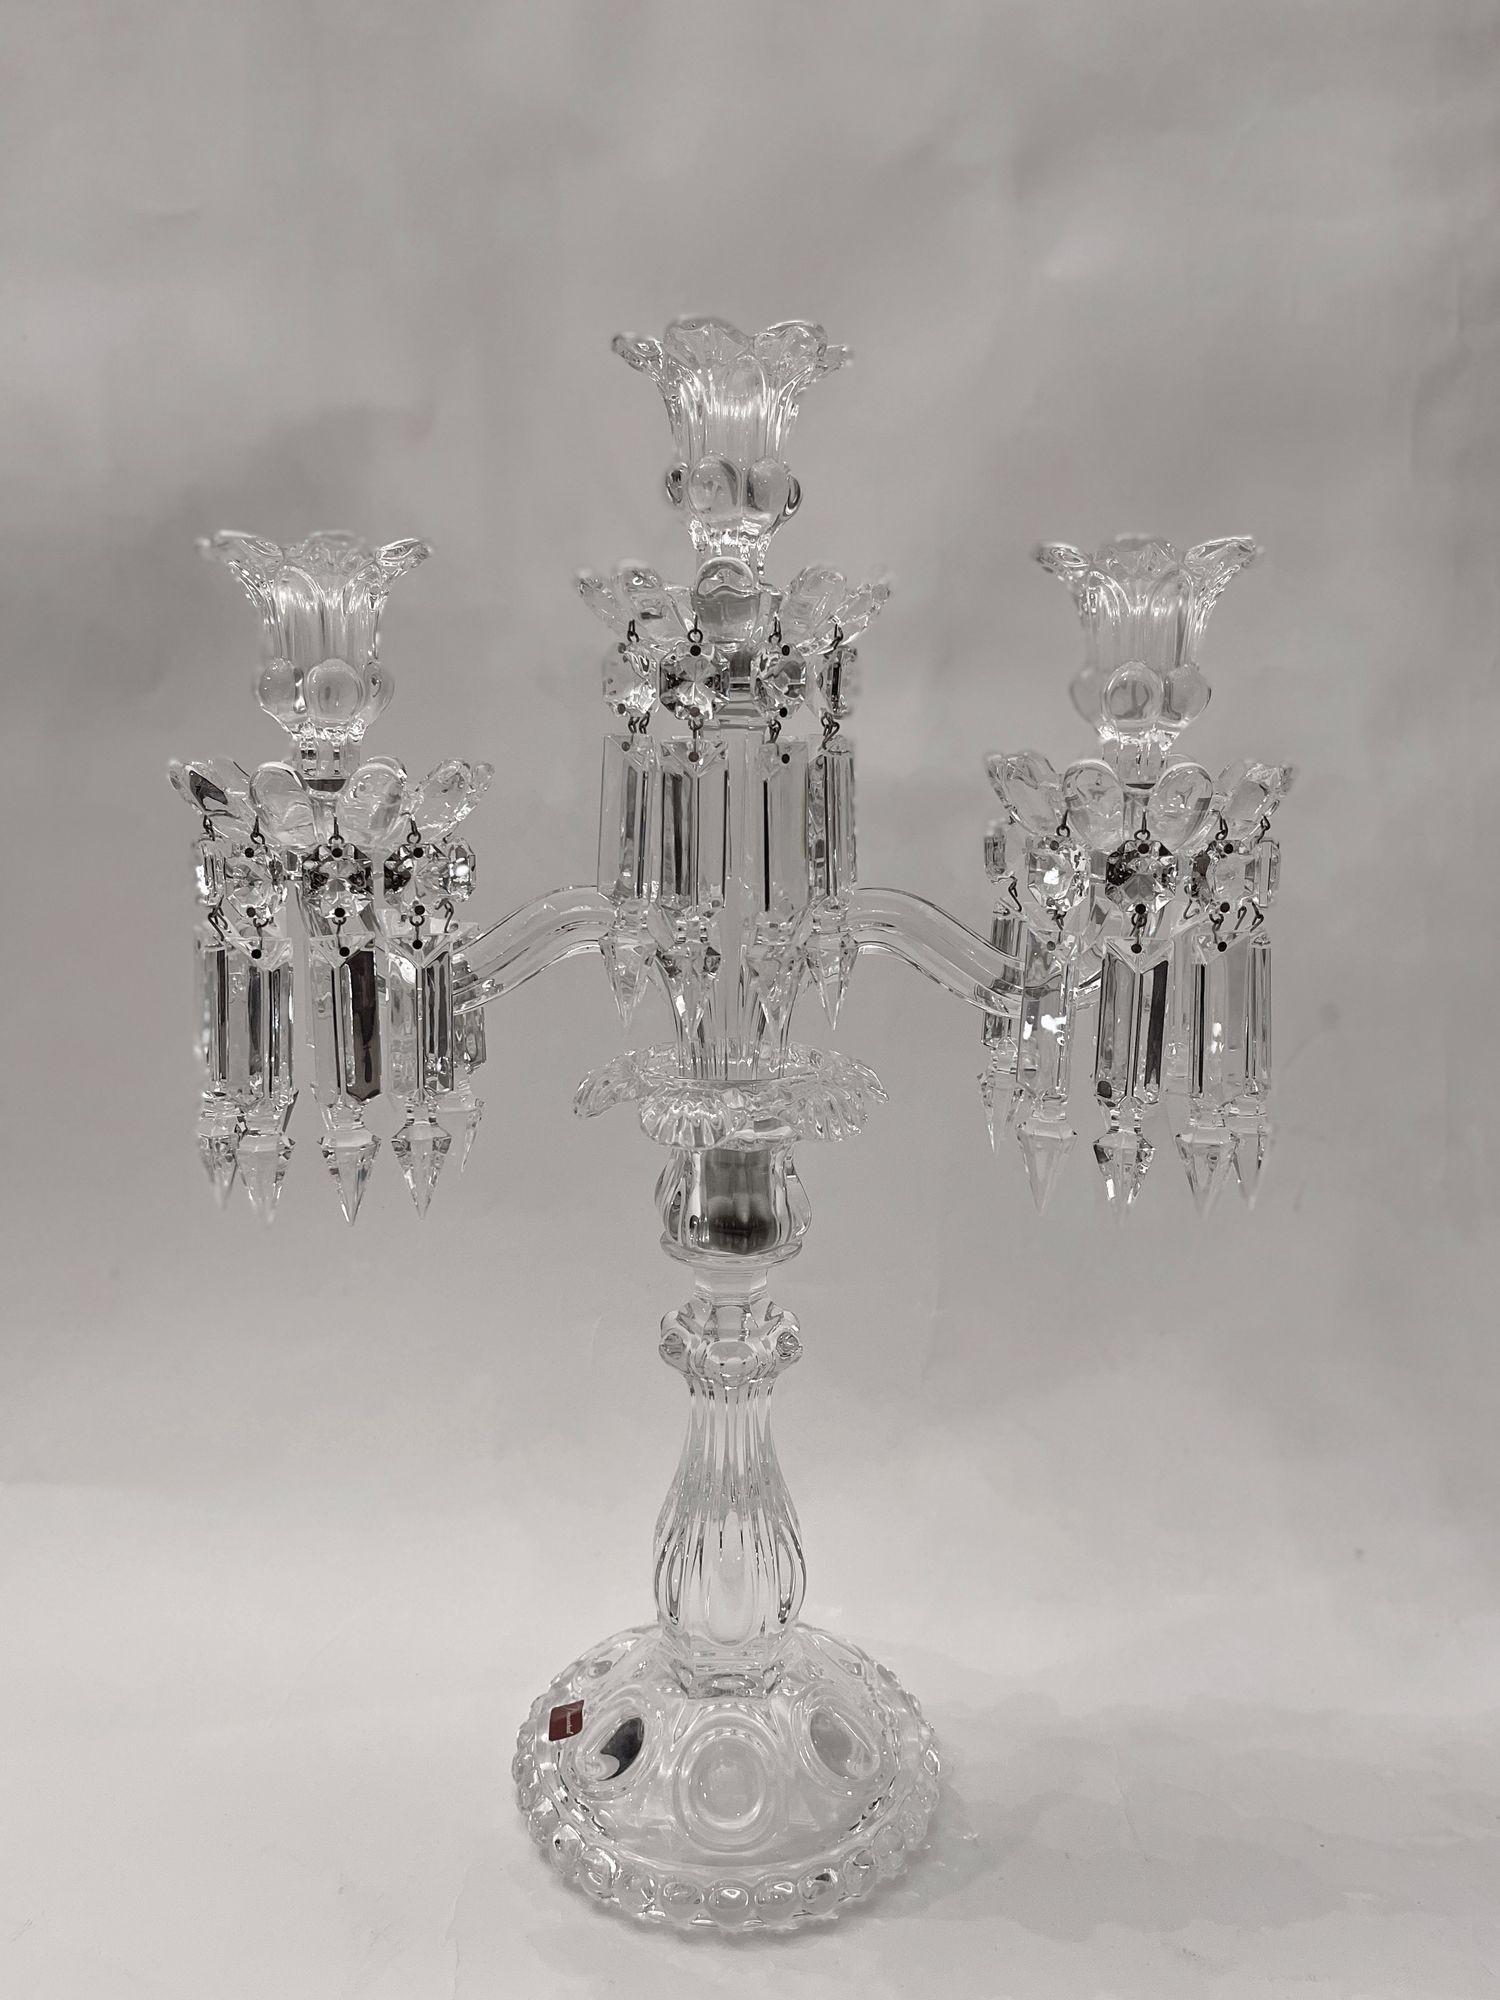 French Provincial Pair of Mid-Century Modern Neoclassical Glass Obelisk Candelabras by Baccarat